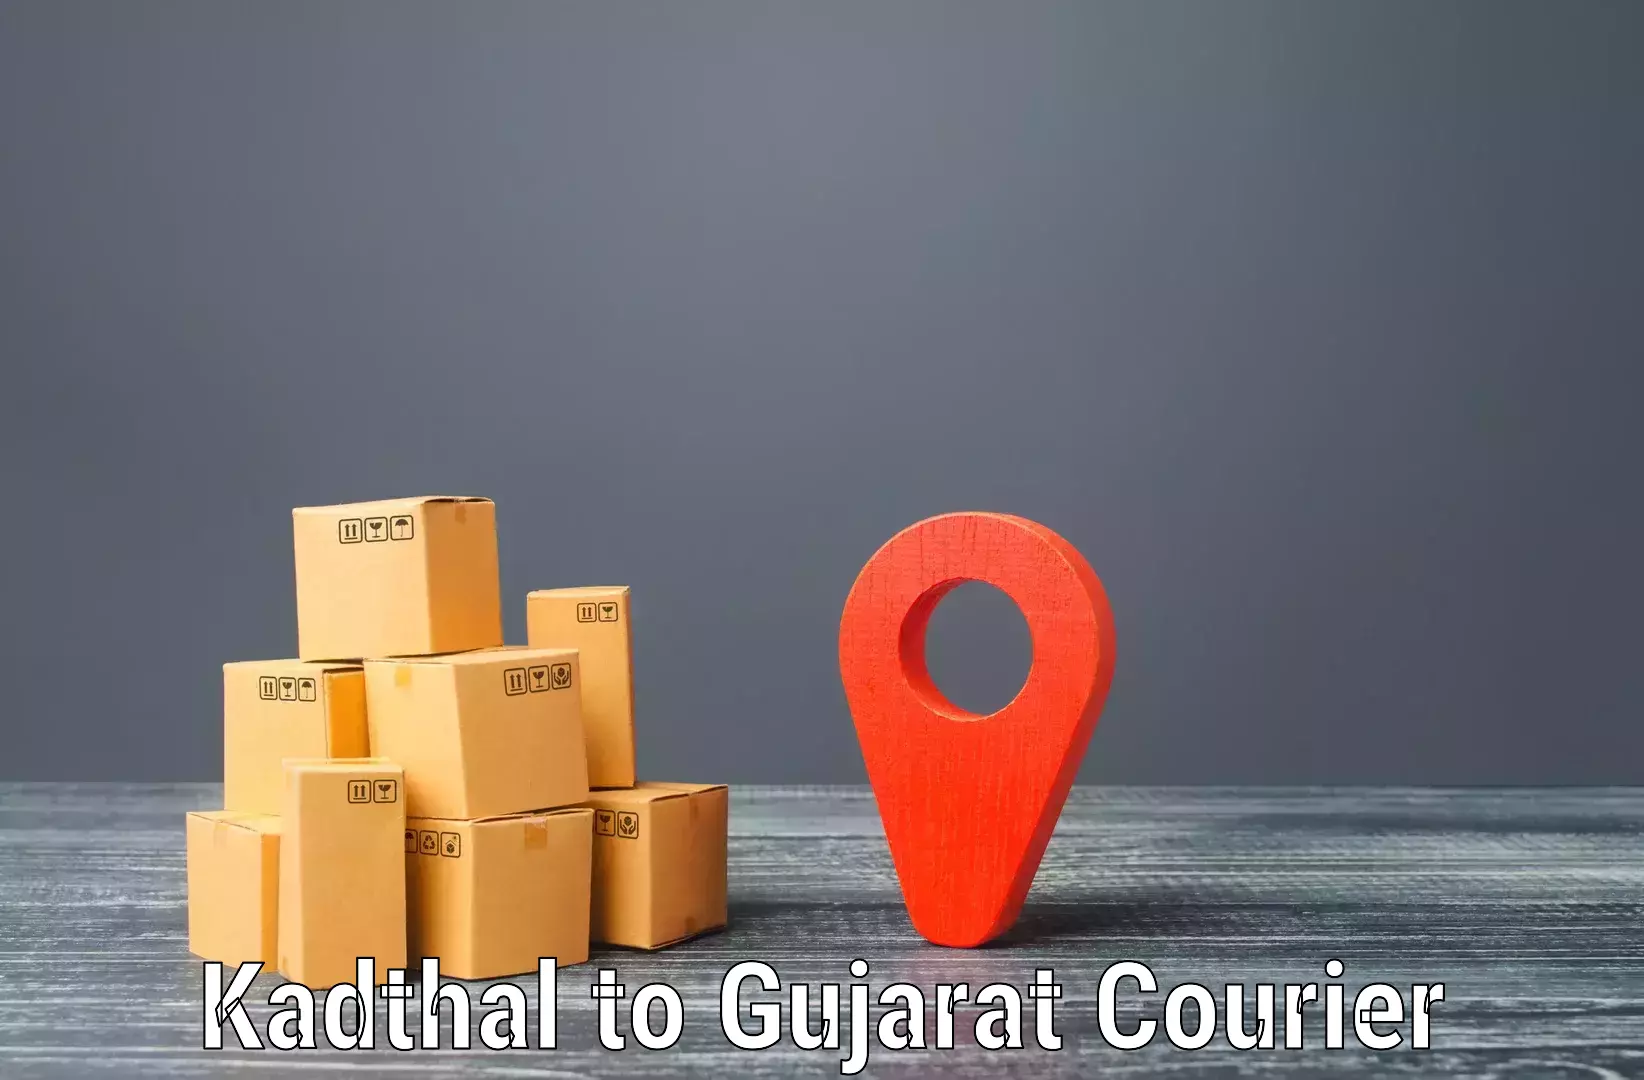 Air courier services Kadthal to Kachchh